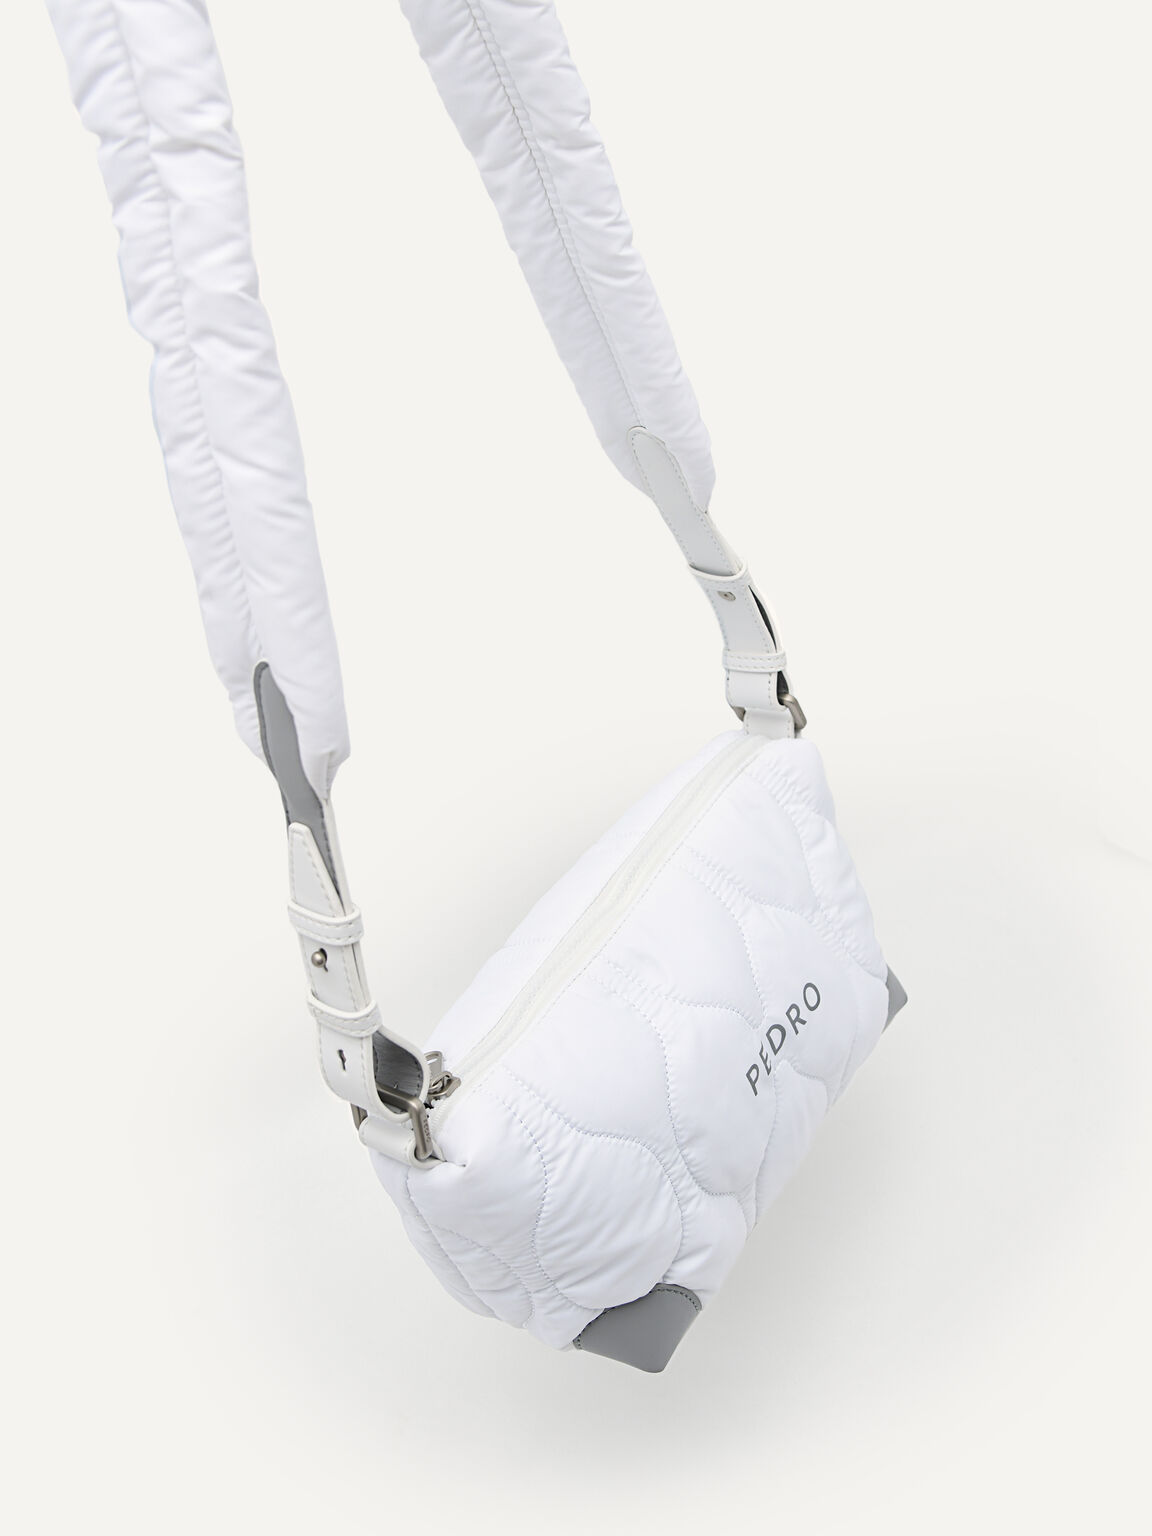 Plush Quilted Sling Bag, White